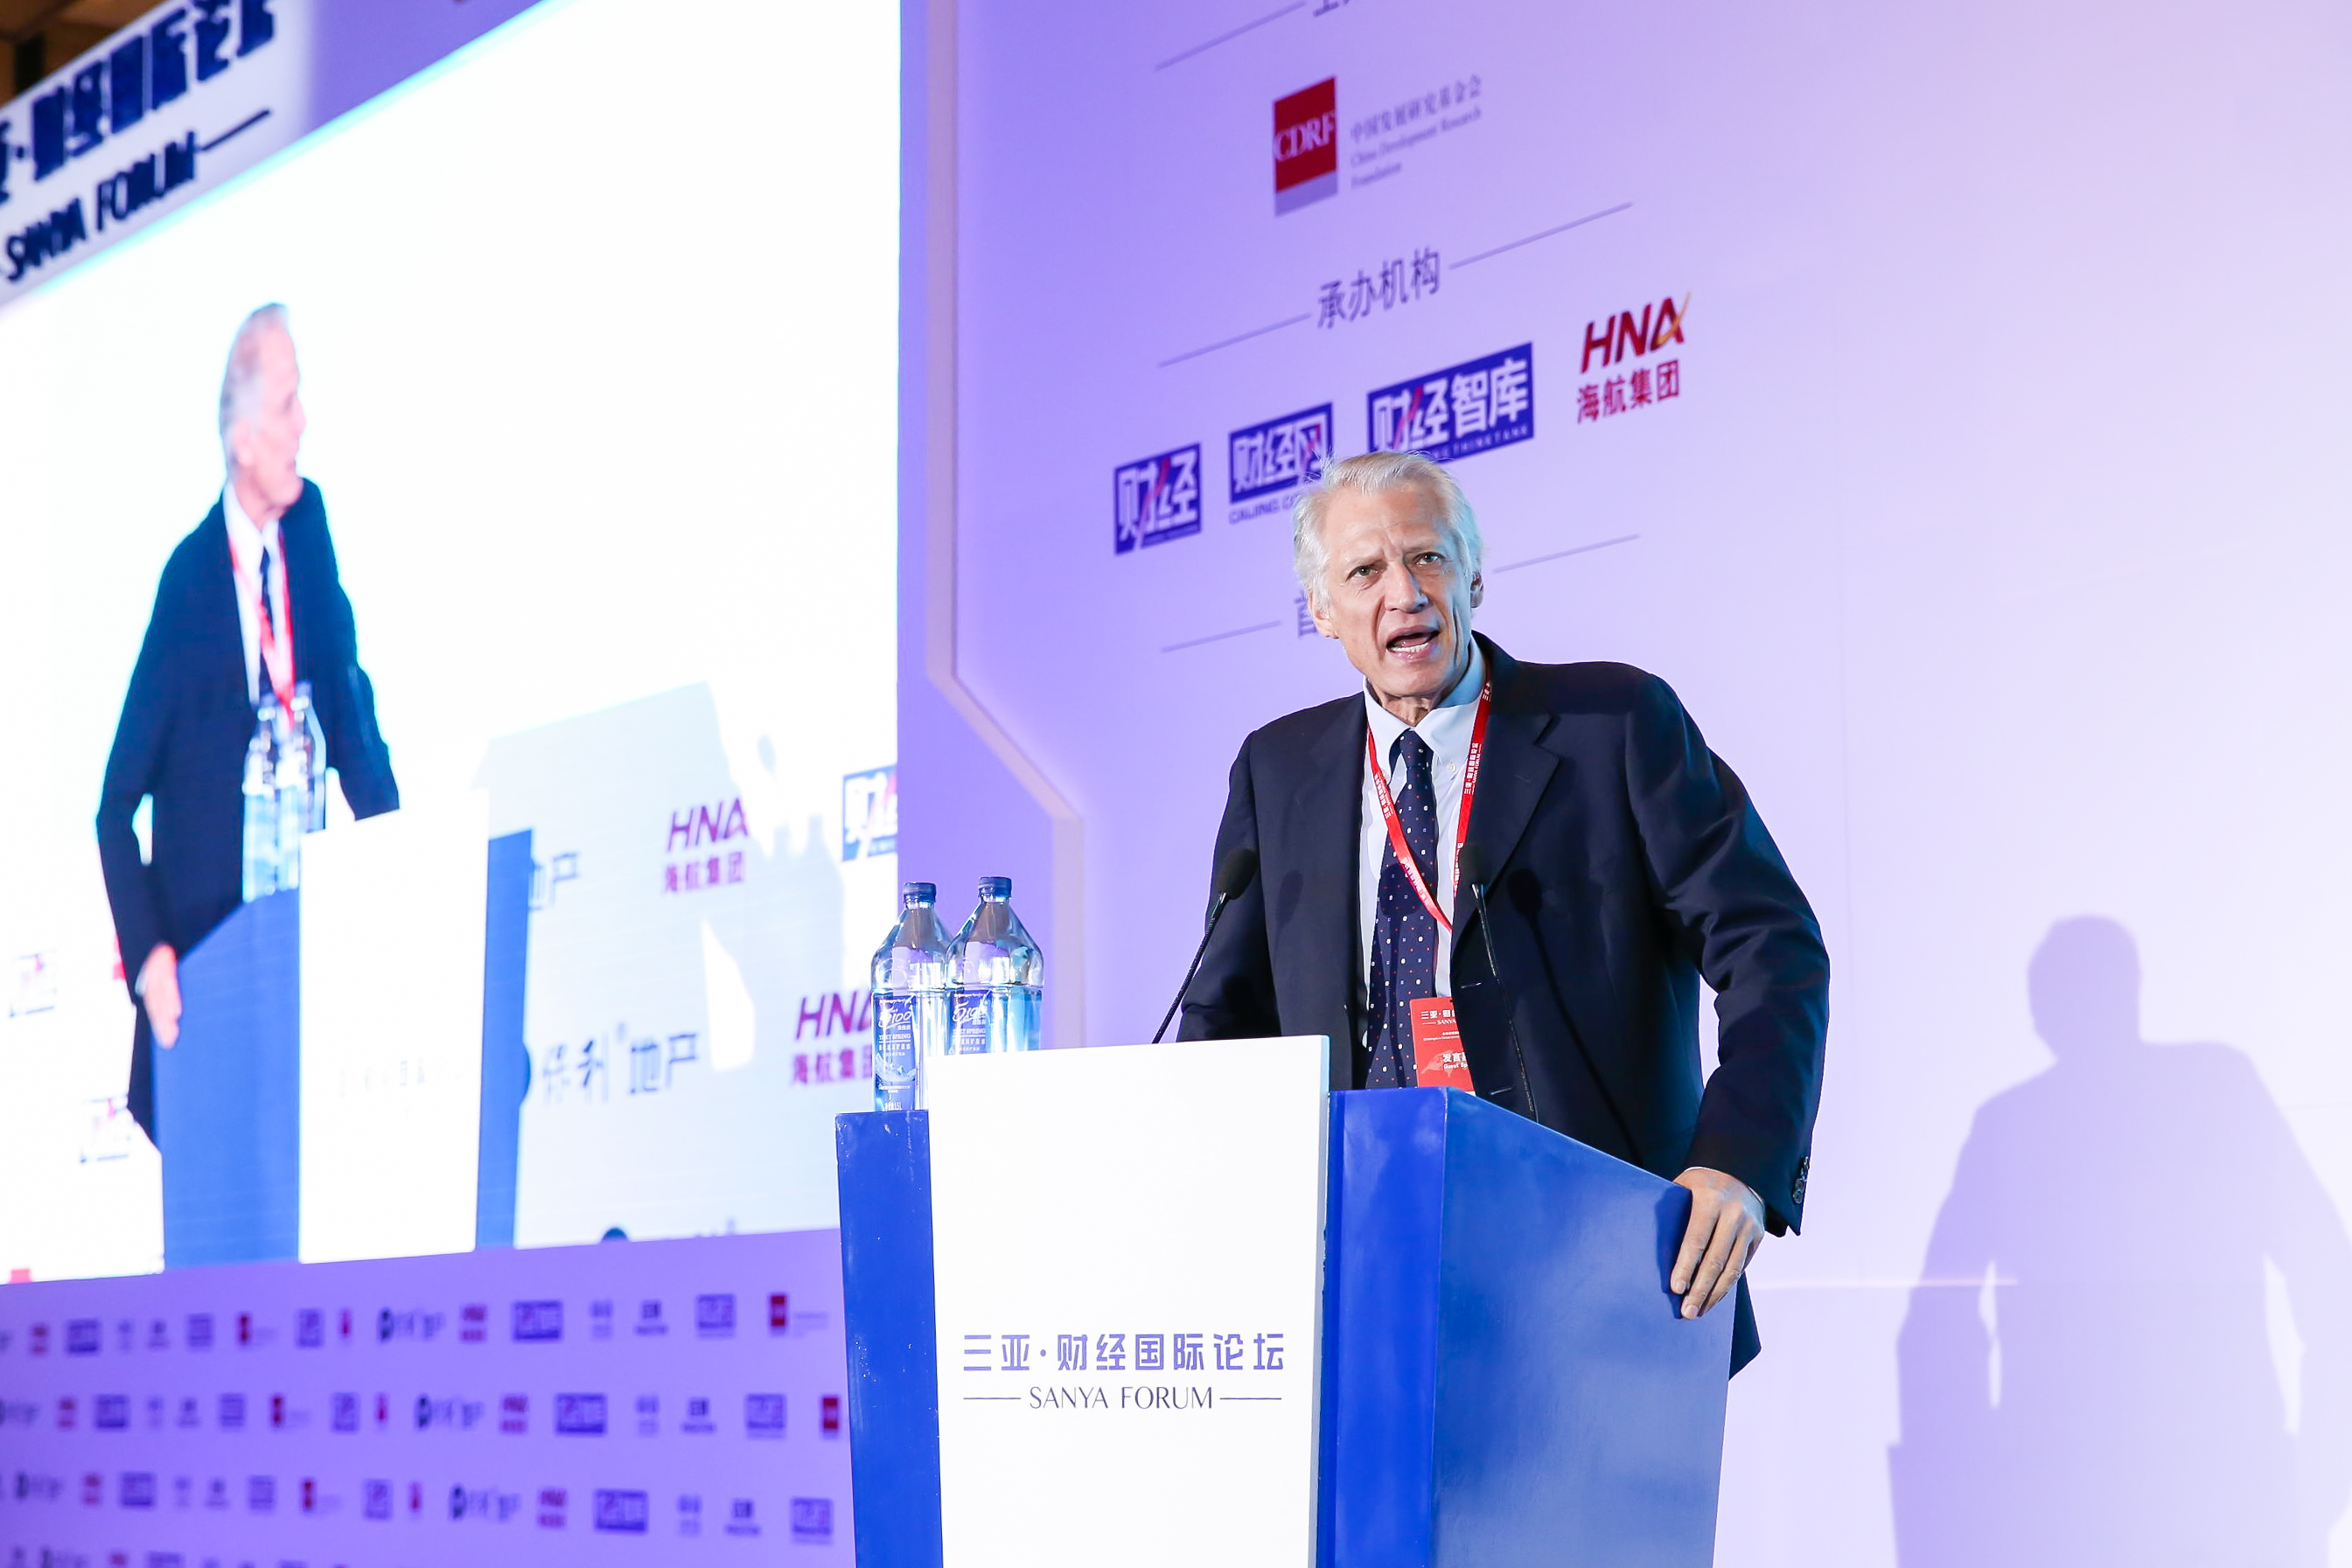 Dominique de Villepin, former prime minister of France delivers a keynote speech at the opening ceremony of the Sanya Forum 2017 in Sanya, Hainan Province on Dec. 9. [Photo provided to China.org.cn]